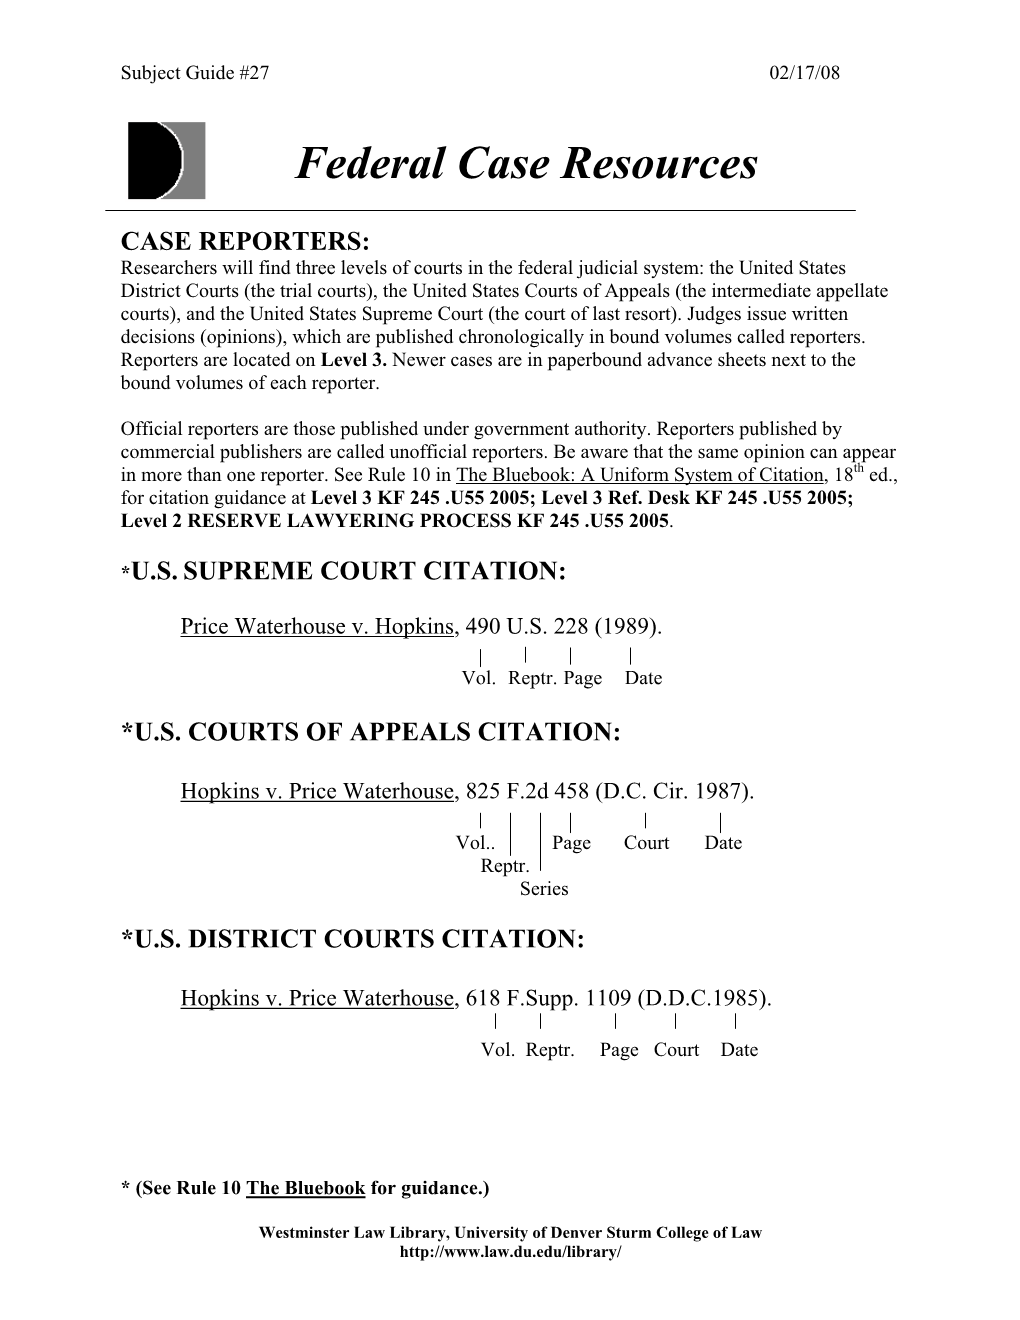 Federal Case Resources